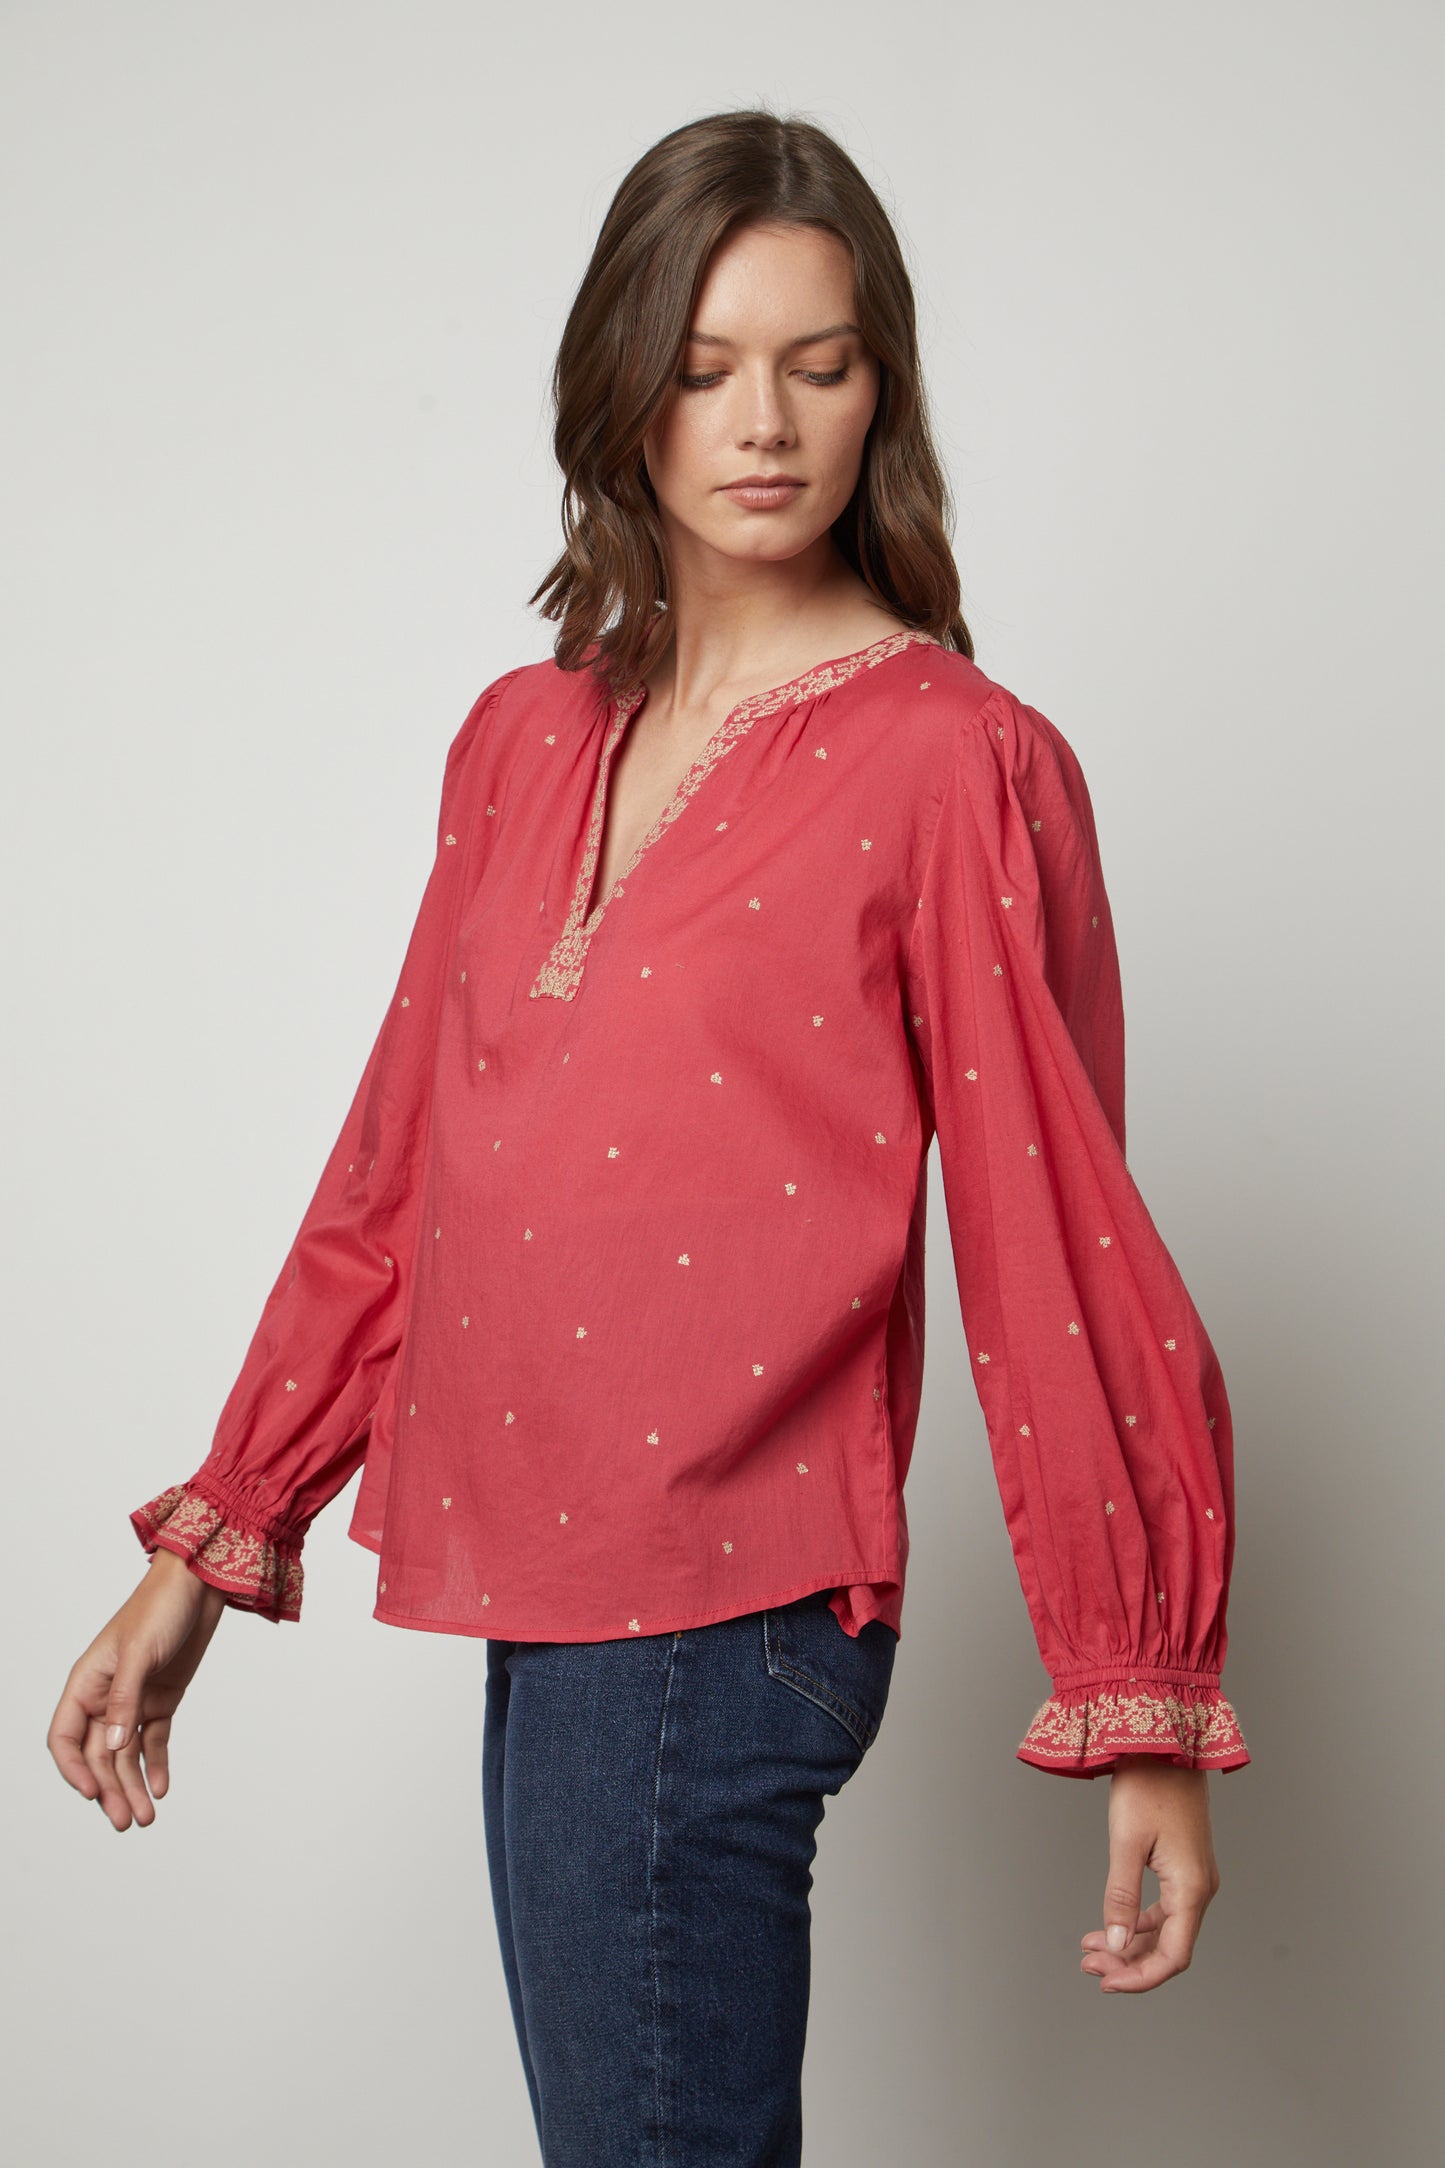 ANIA TOP IN BERRY